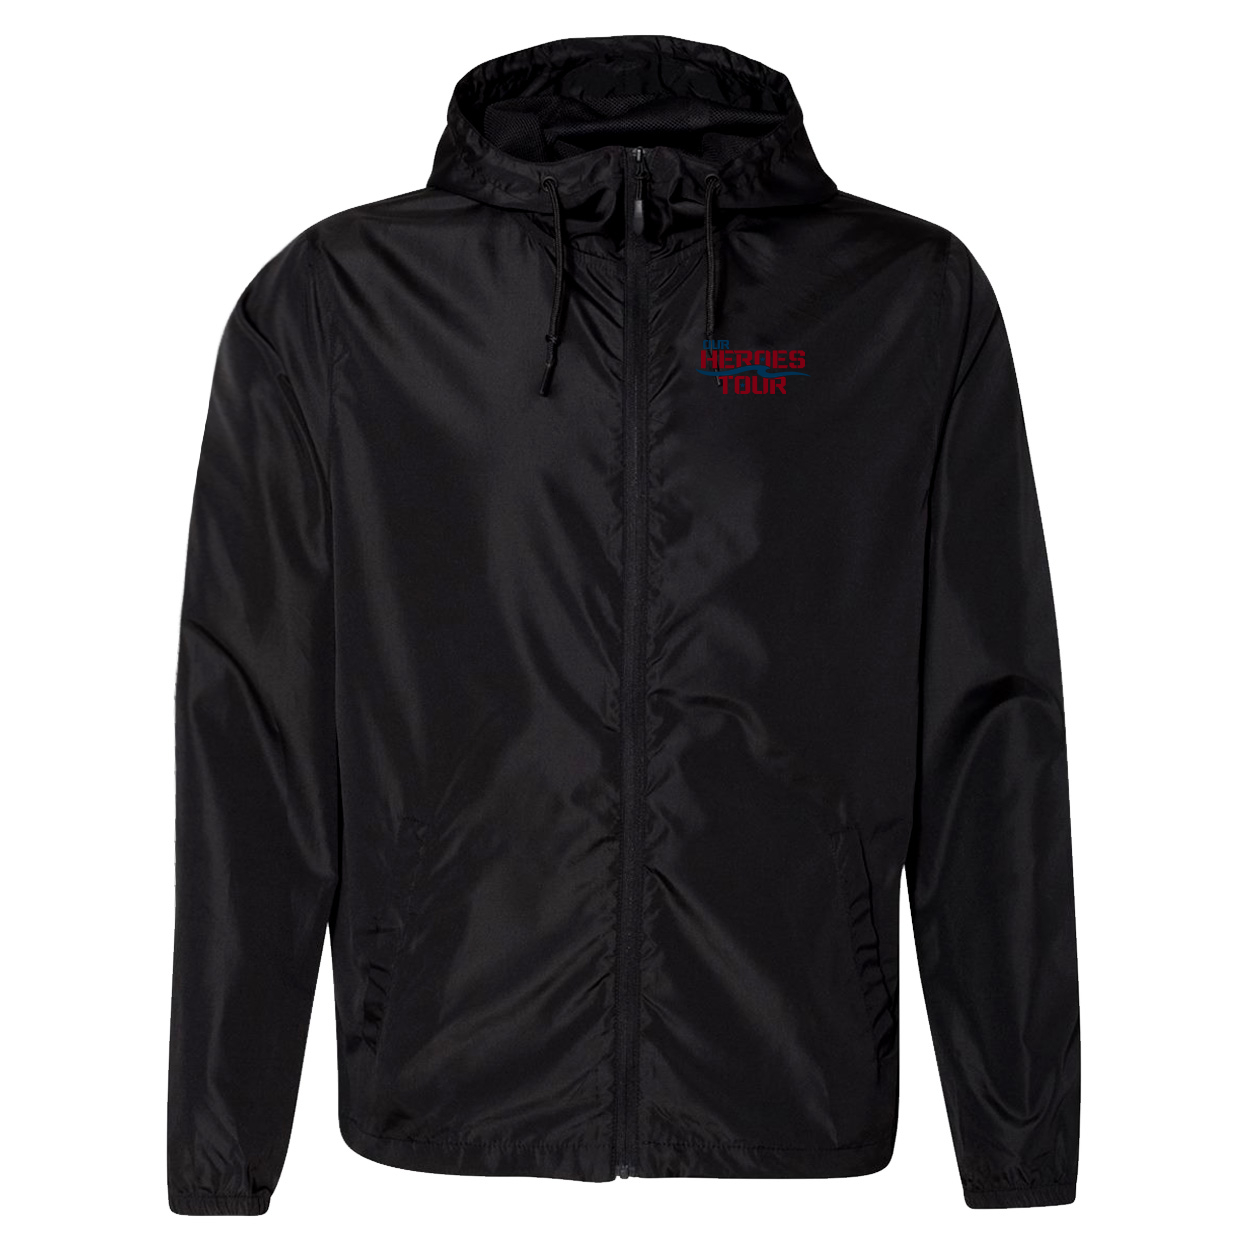 Our Heroes Tour Night Out Lightweight Windbreaker Black